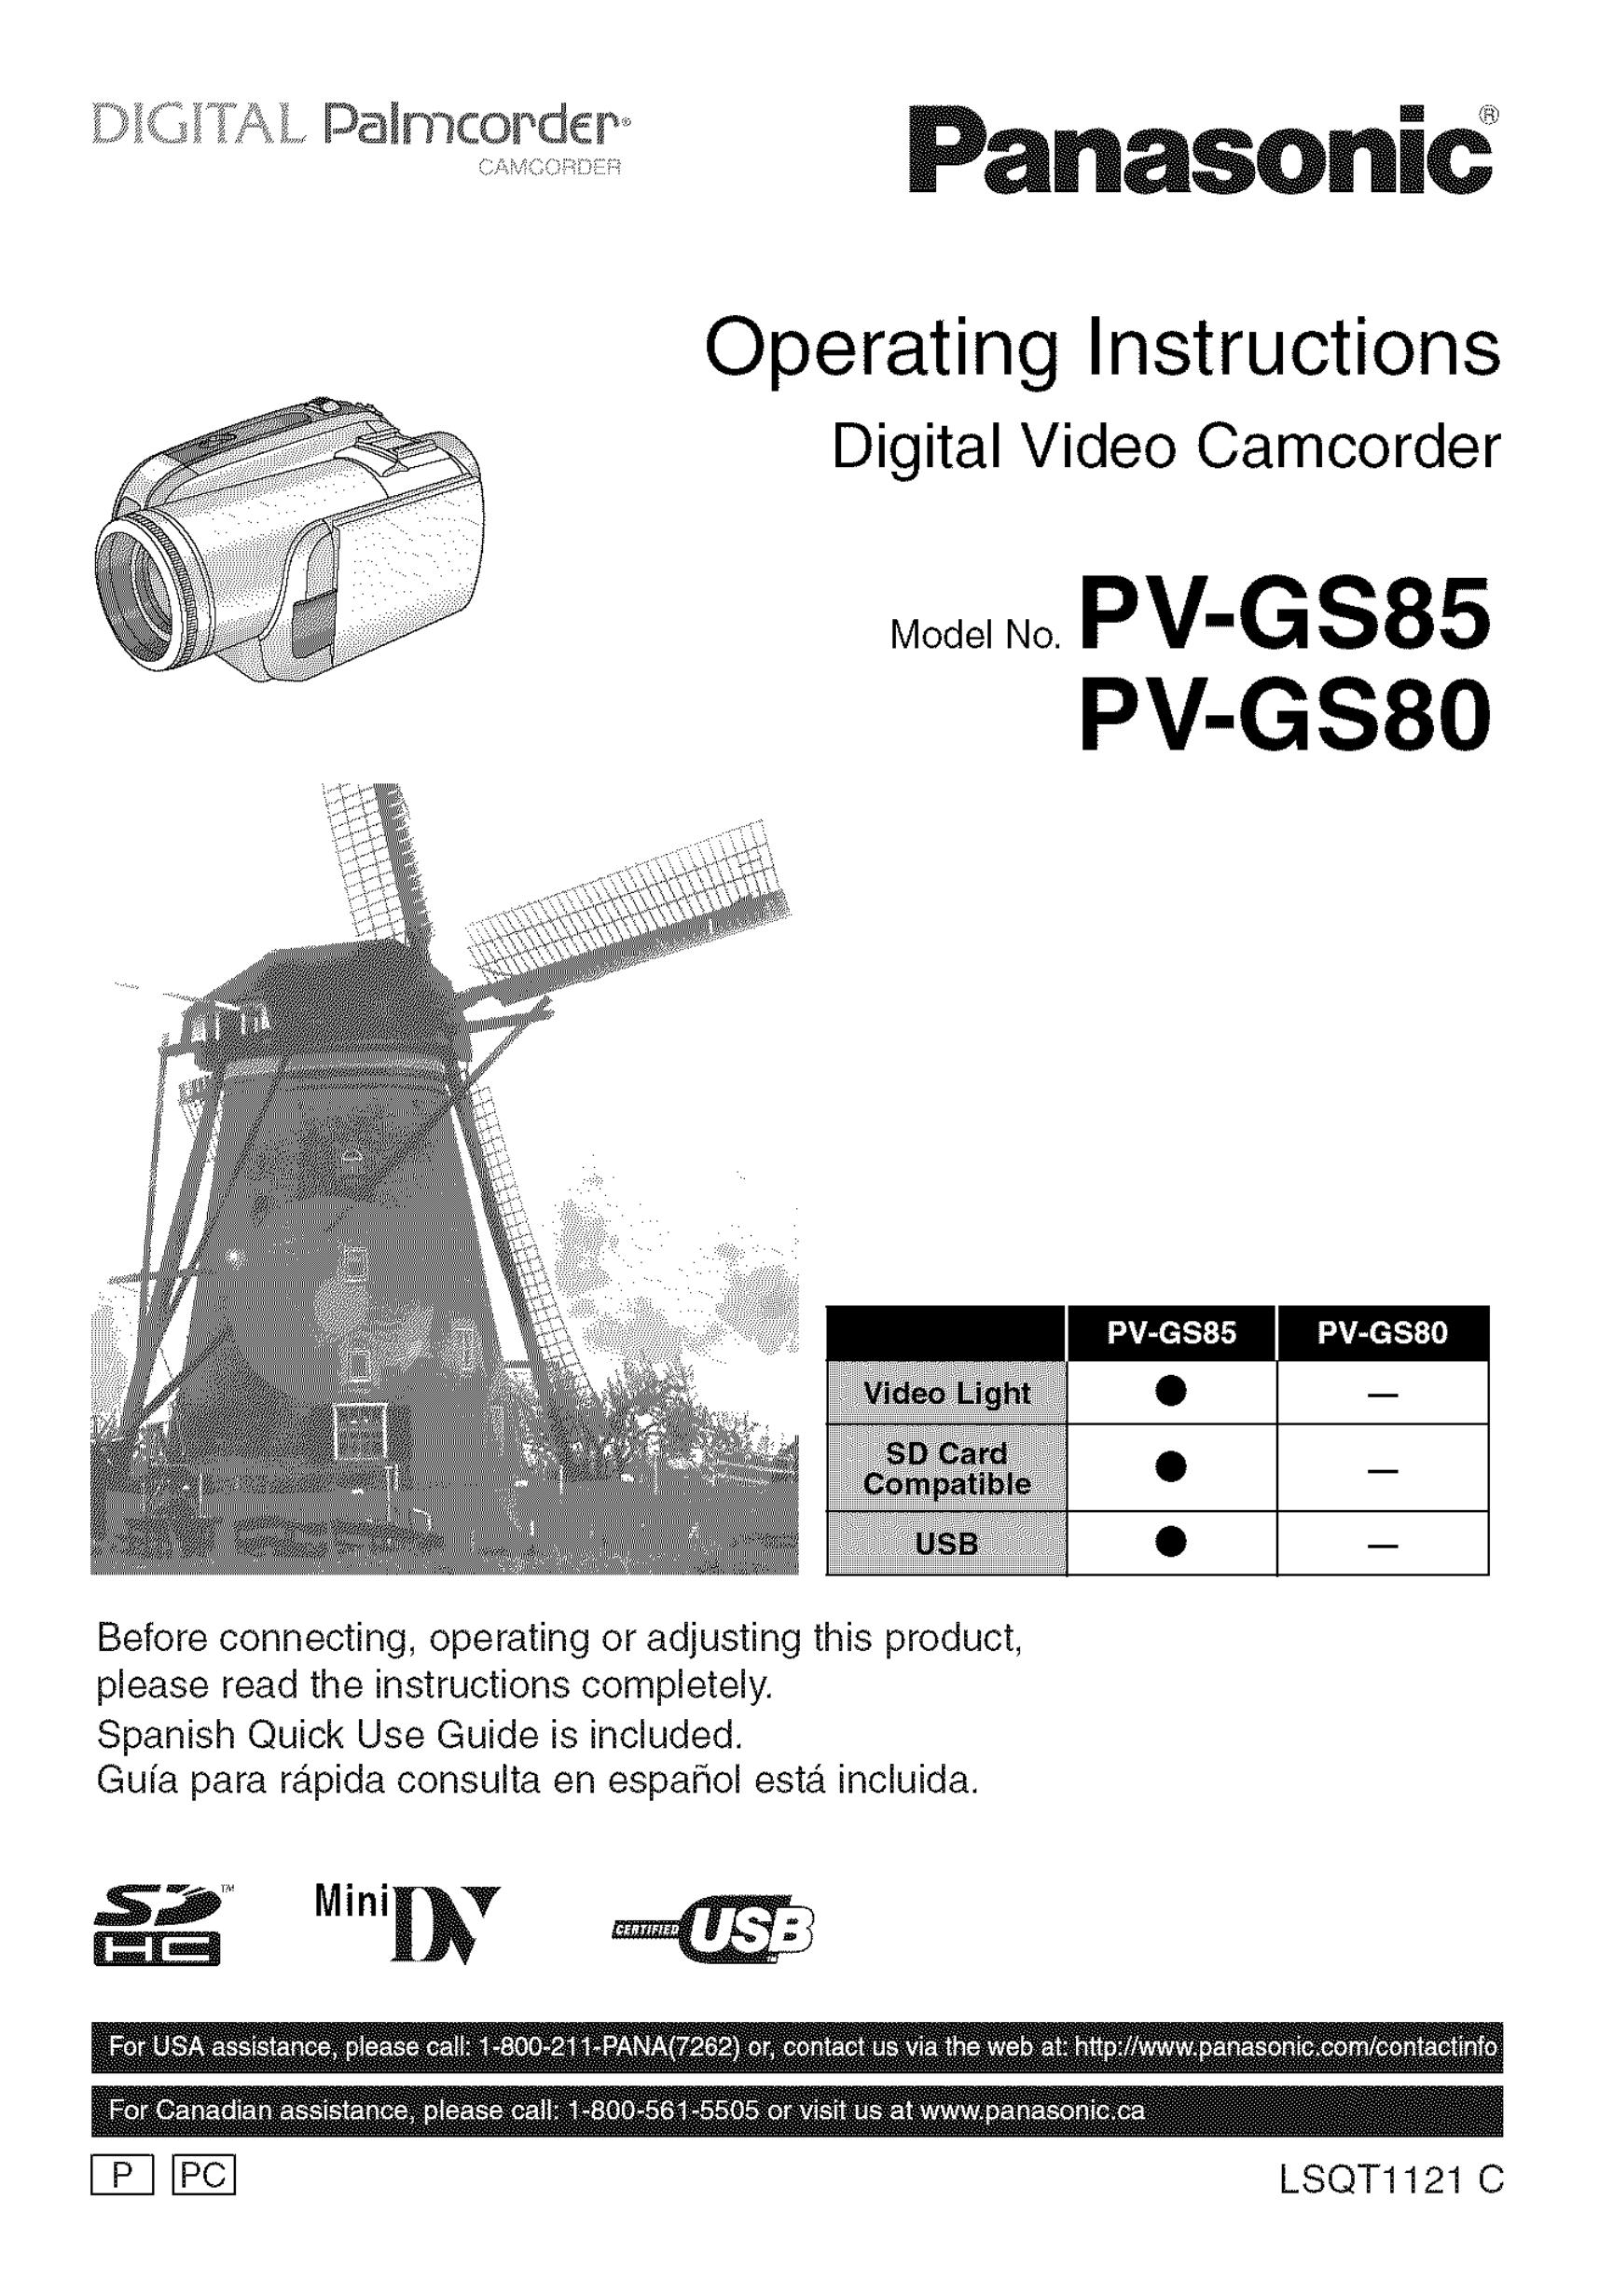 Panasonic PV-GS80 Camcorder Accessories User Manual